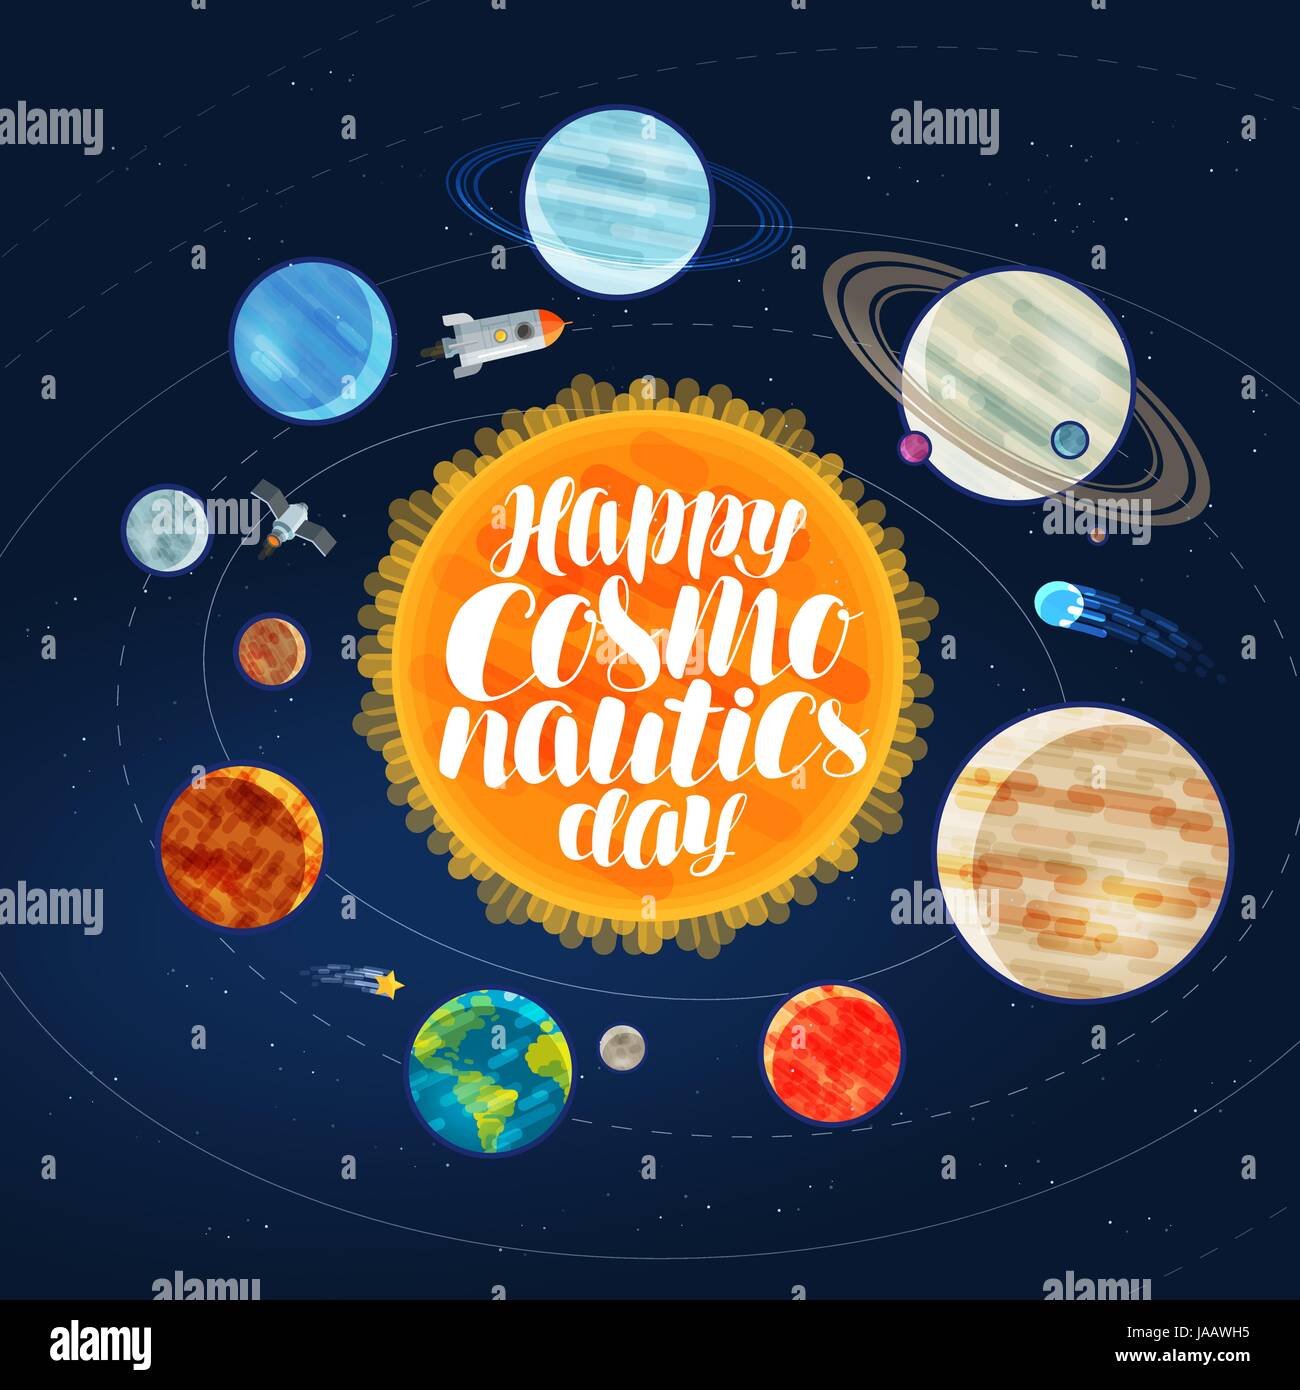 Happy cosmonautics day, banner. Outer space, cosmos, galaxy, planets and stars concept. Cartoon vector illustration Stock Vector